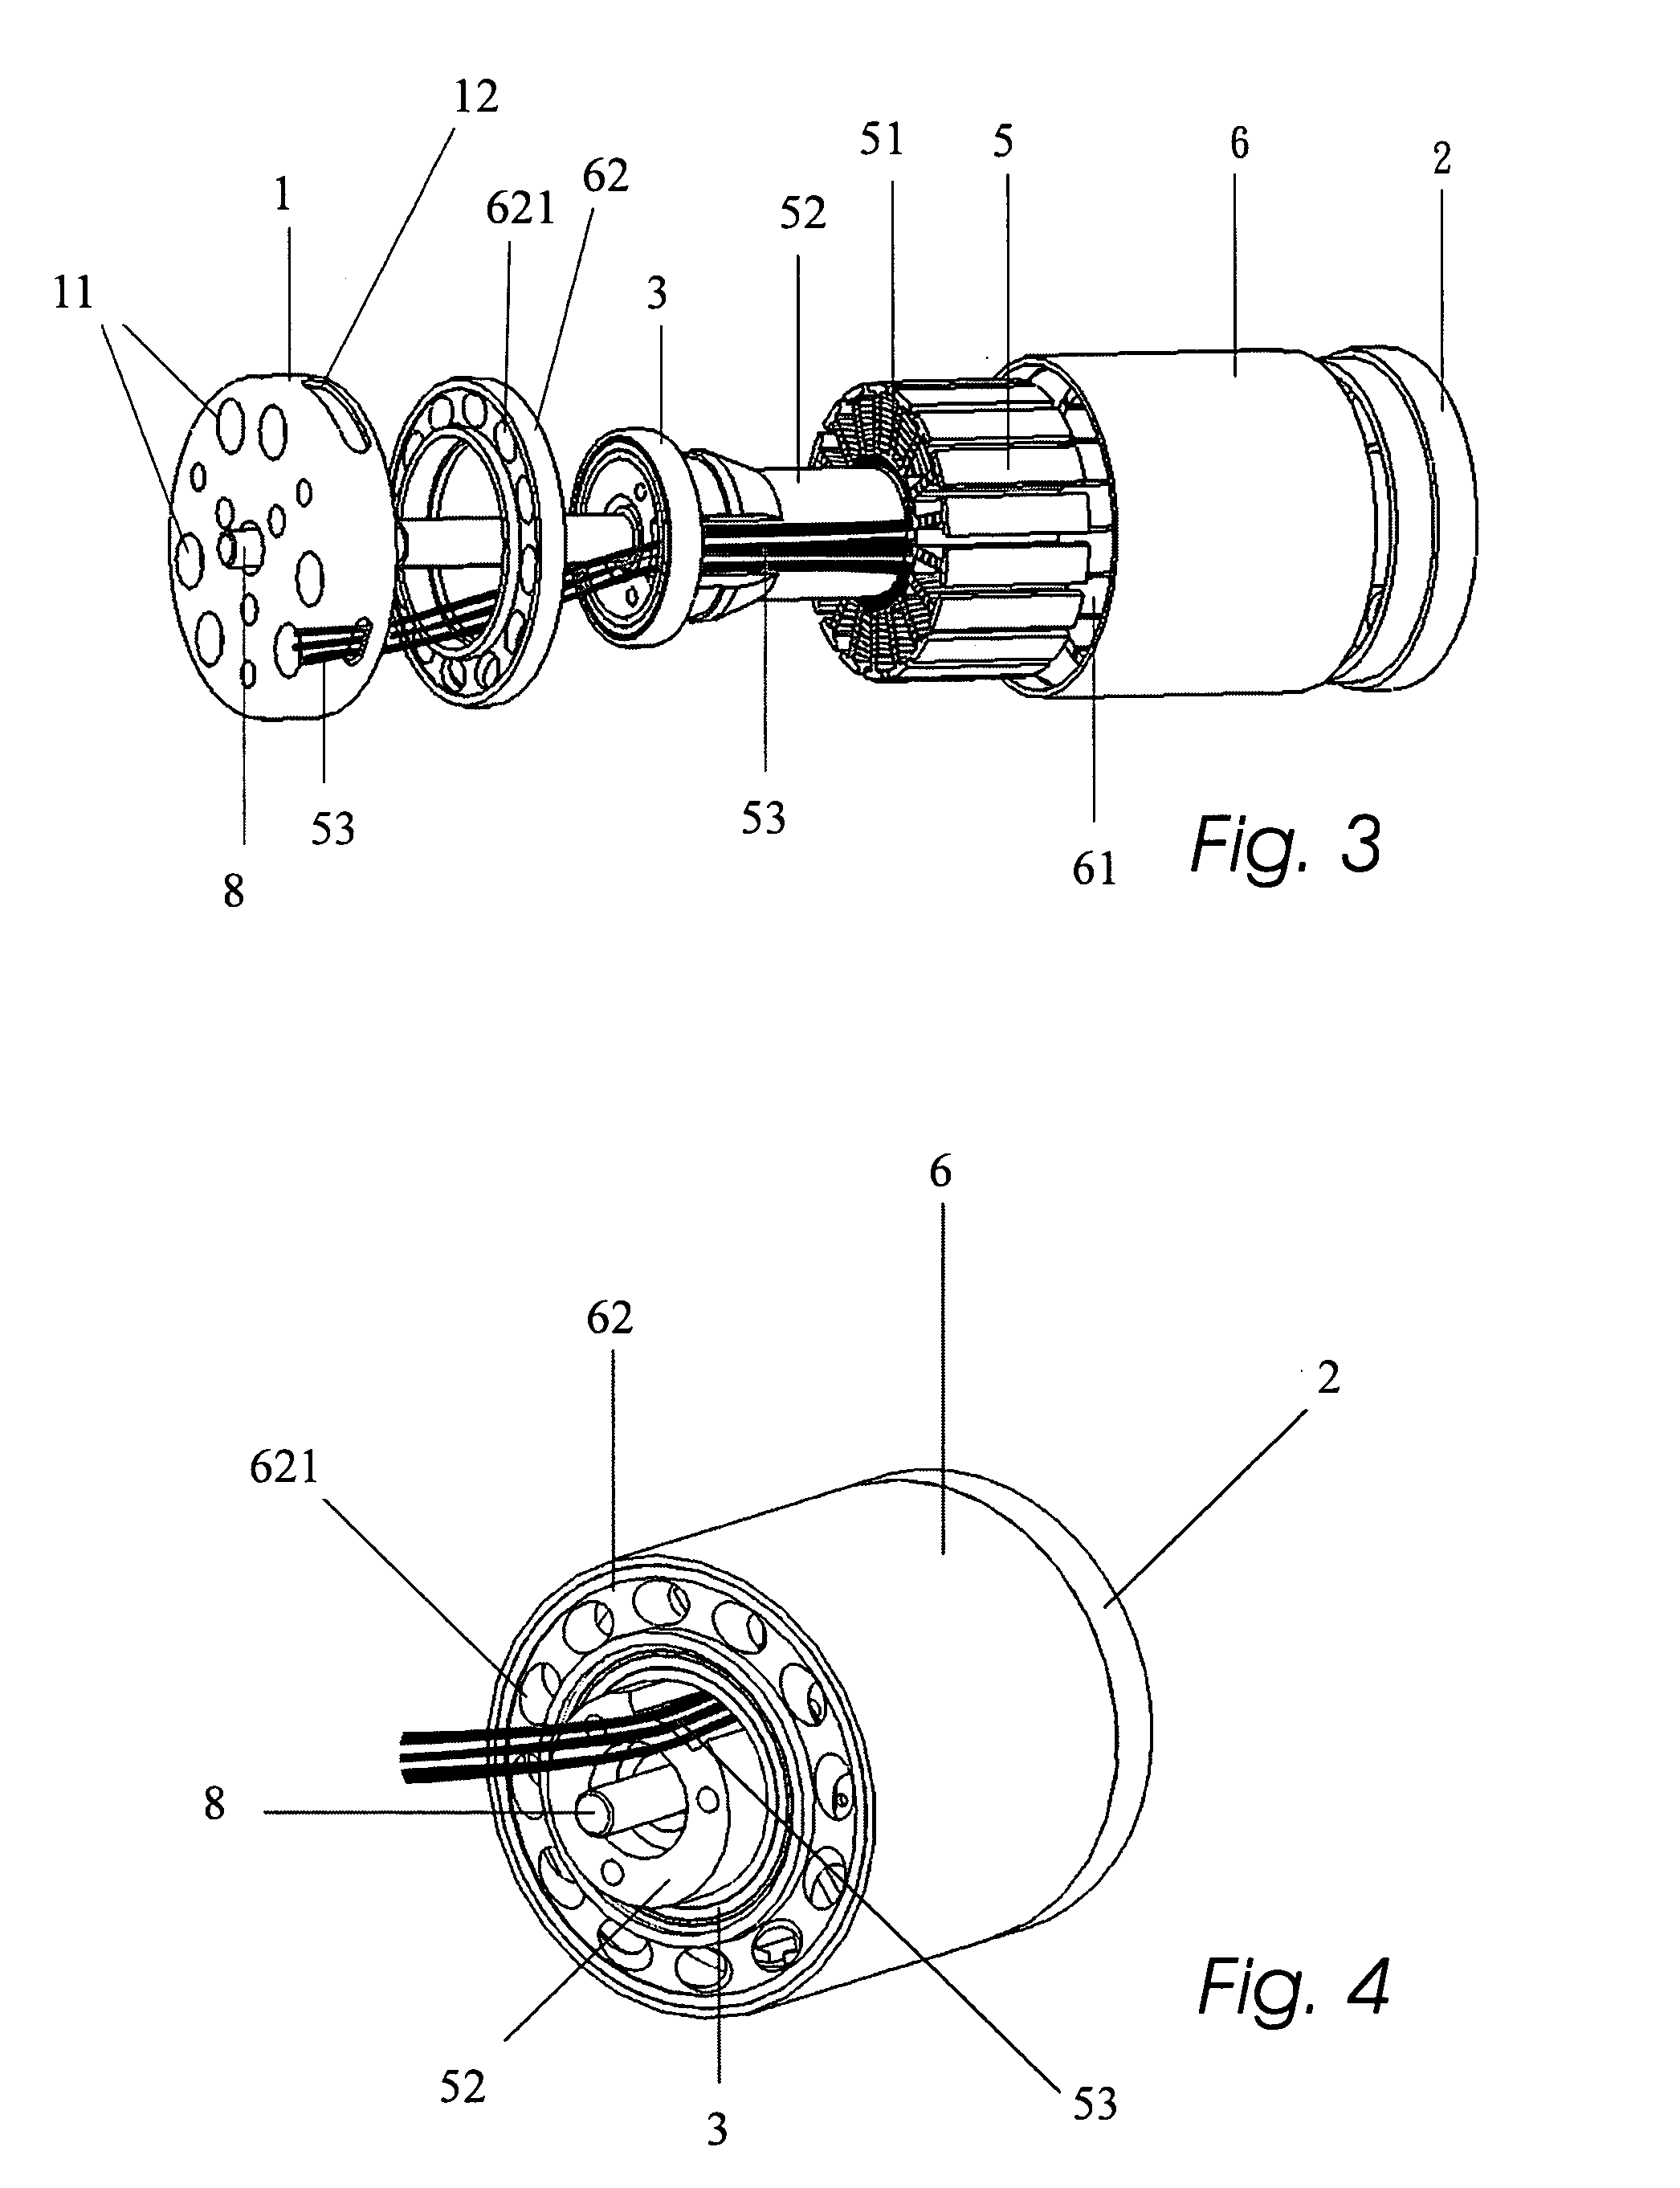 Air-cooled motor